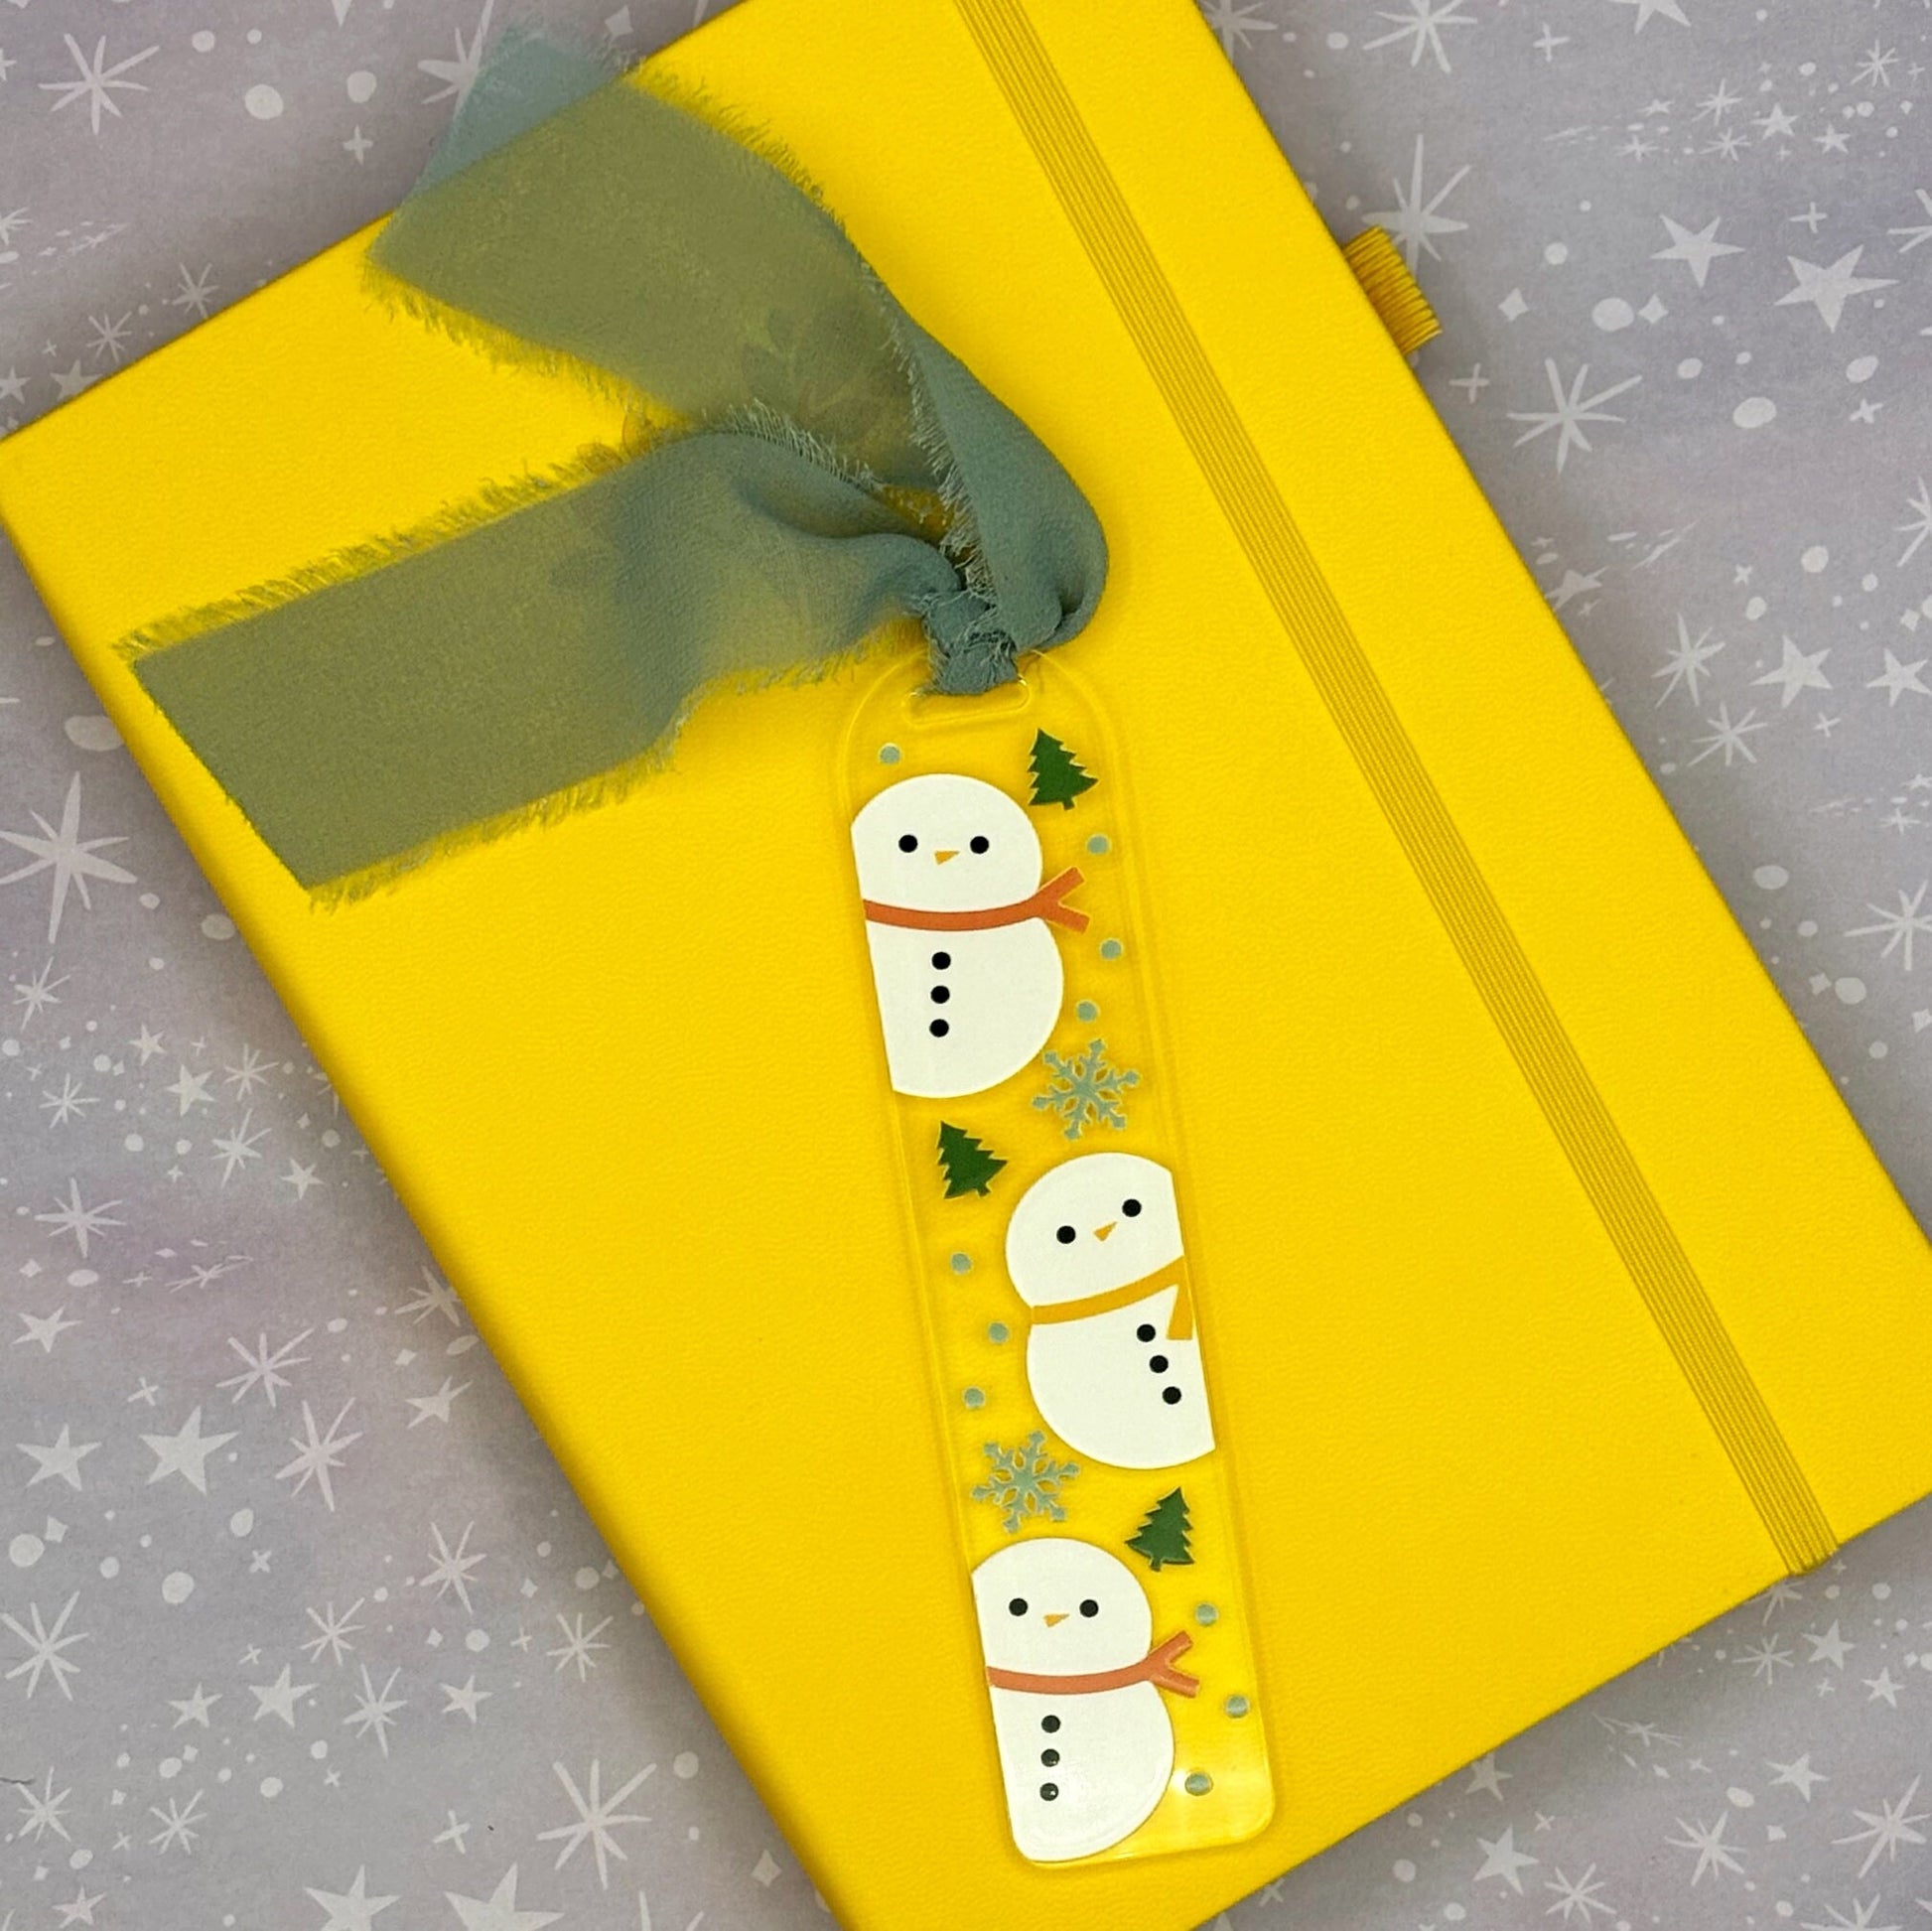 Snowman and Snowflakes Cute Acrylic Bookmark with Chiffon Ribbon, Winter Bookmark for Reading Lover, Stocking Stuffer for Book Lover, Gift